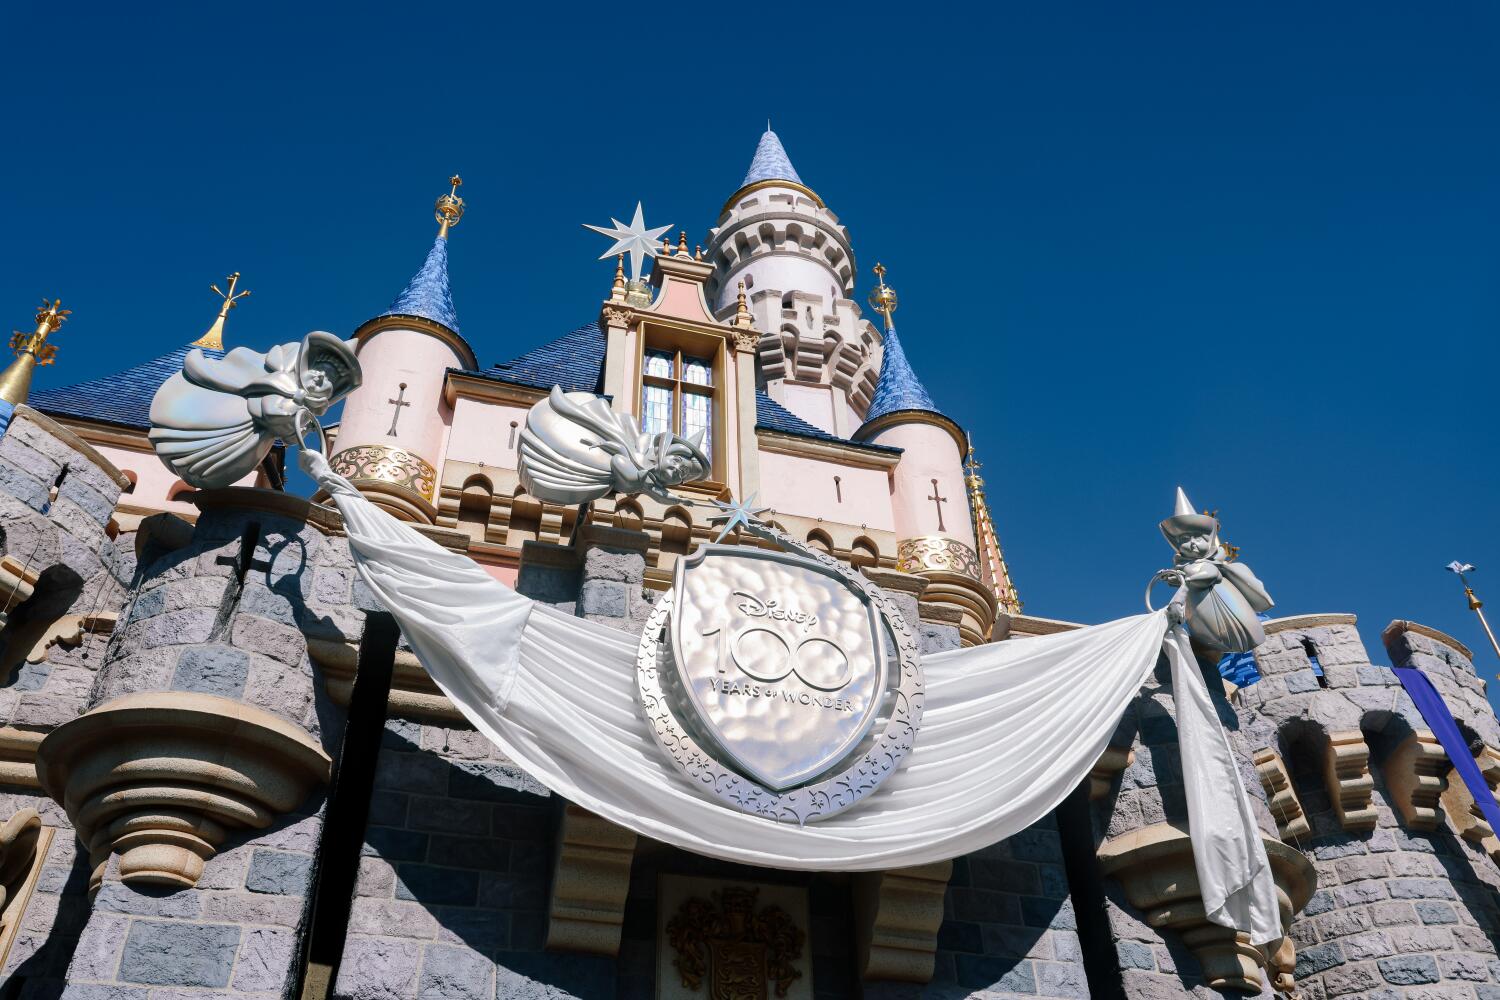 Adults at Disneyland caught brawling on video near teacup ride